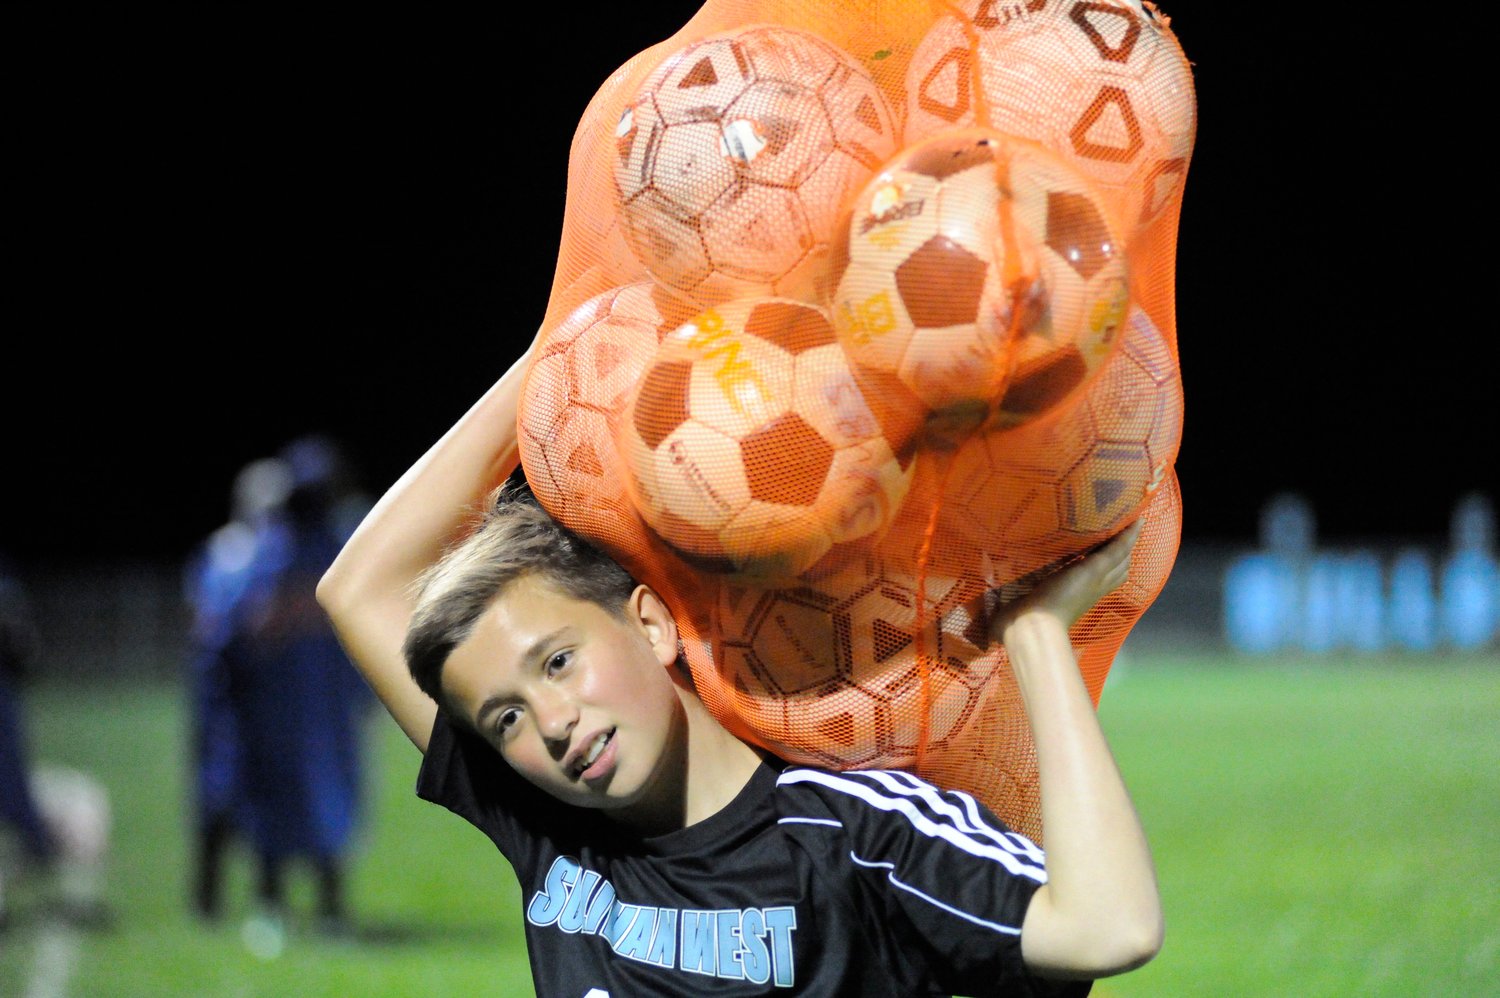 Jack of all trades. Landen Boyd, one of Sullivan West’s up and coming freshman booters, rounds up the team’s soccer balls after the match.